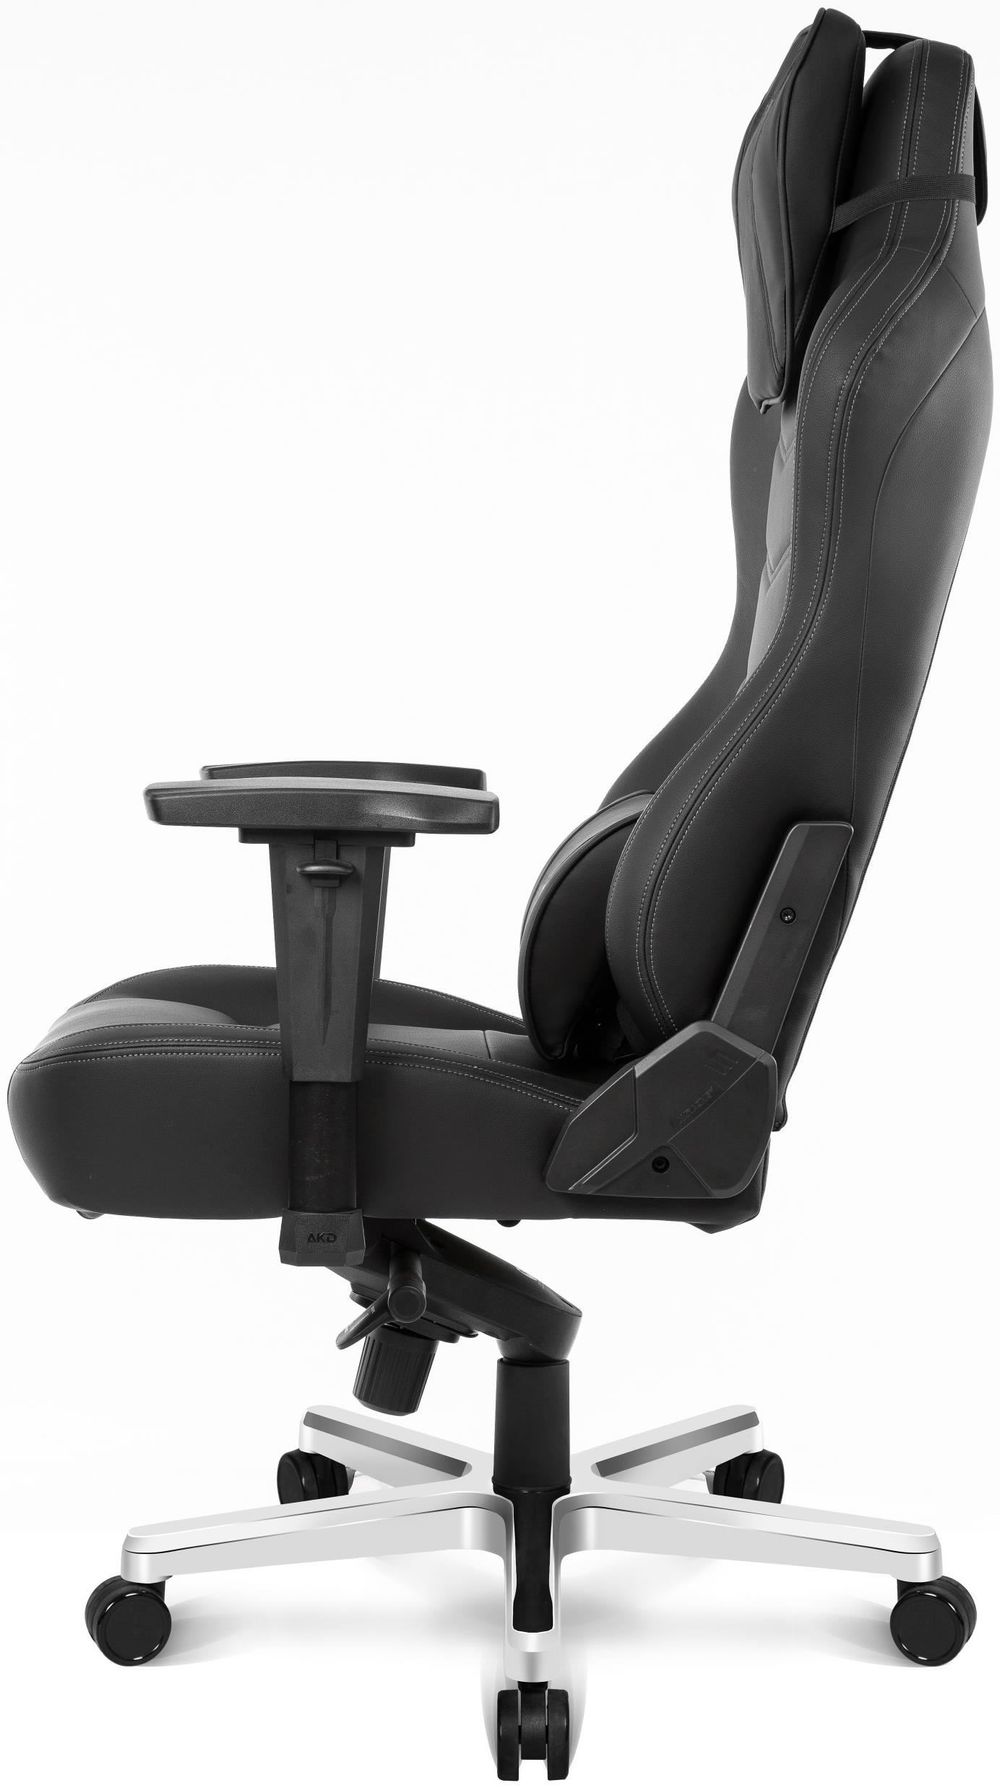 AKRacing Office ONYX Deluxe onyx deluxe